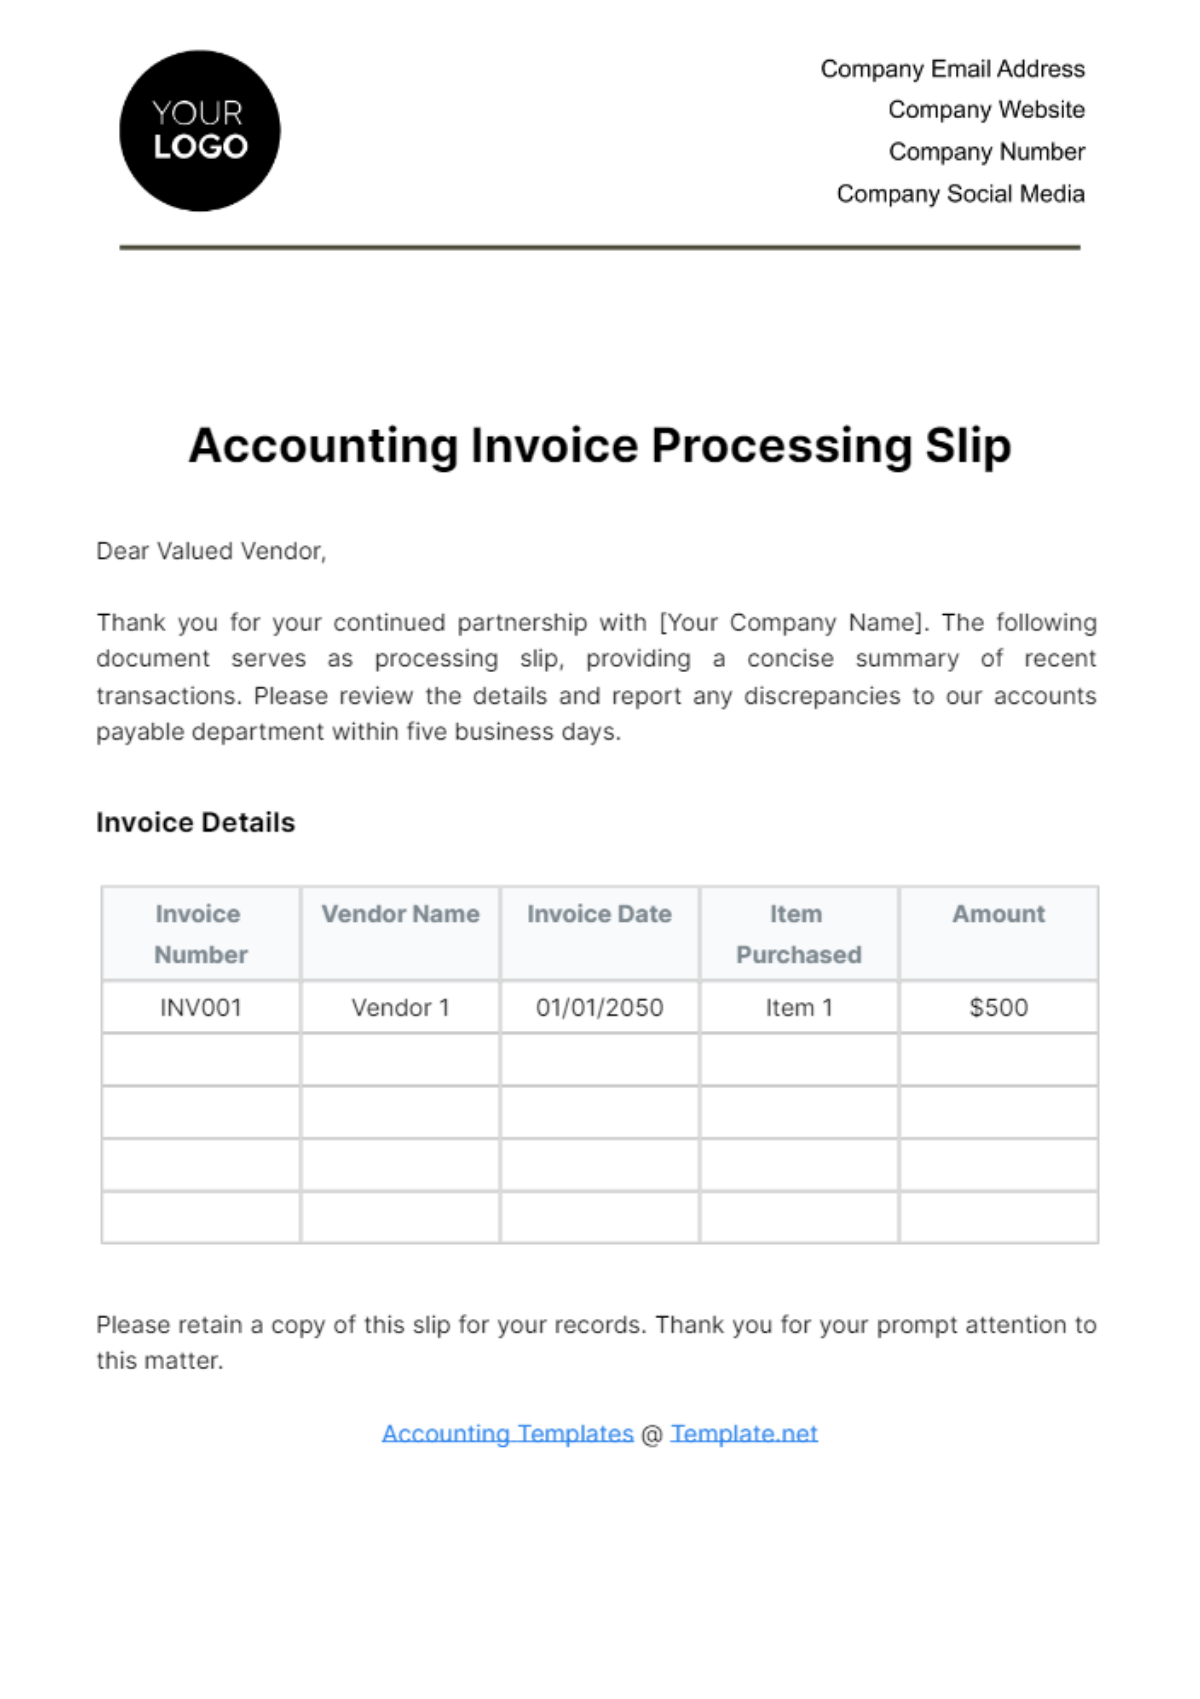 Free Accounting Invoice Processing Slip Template